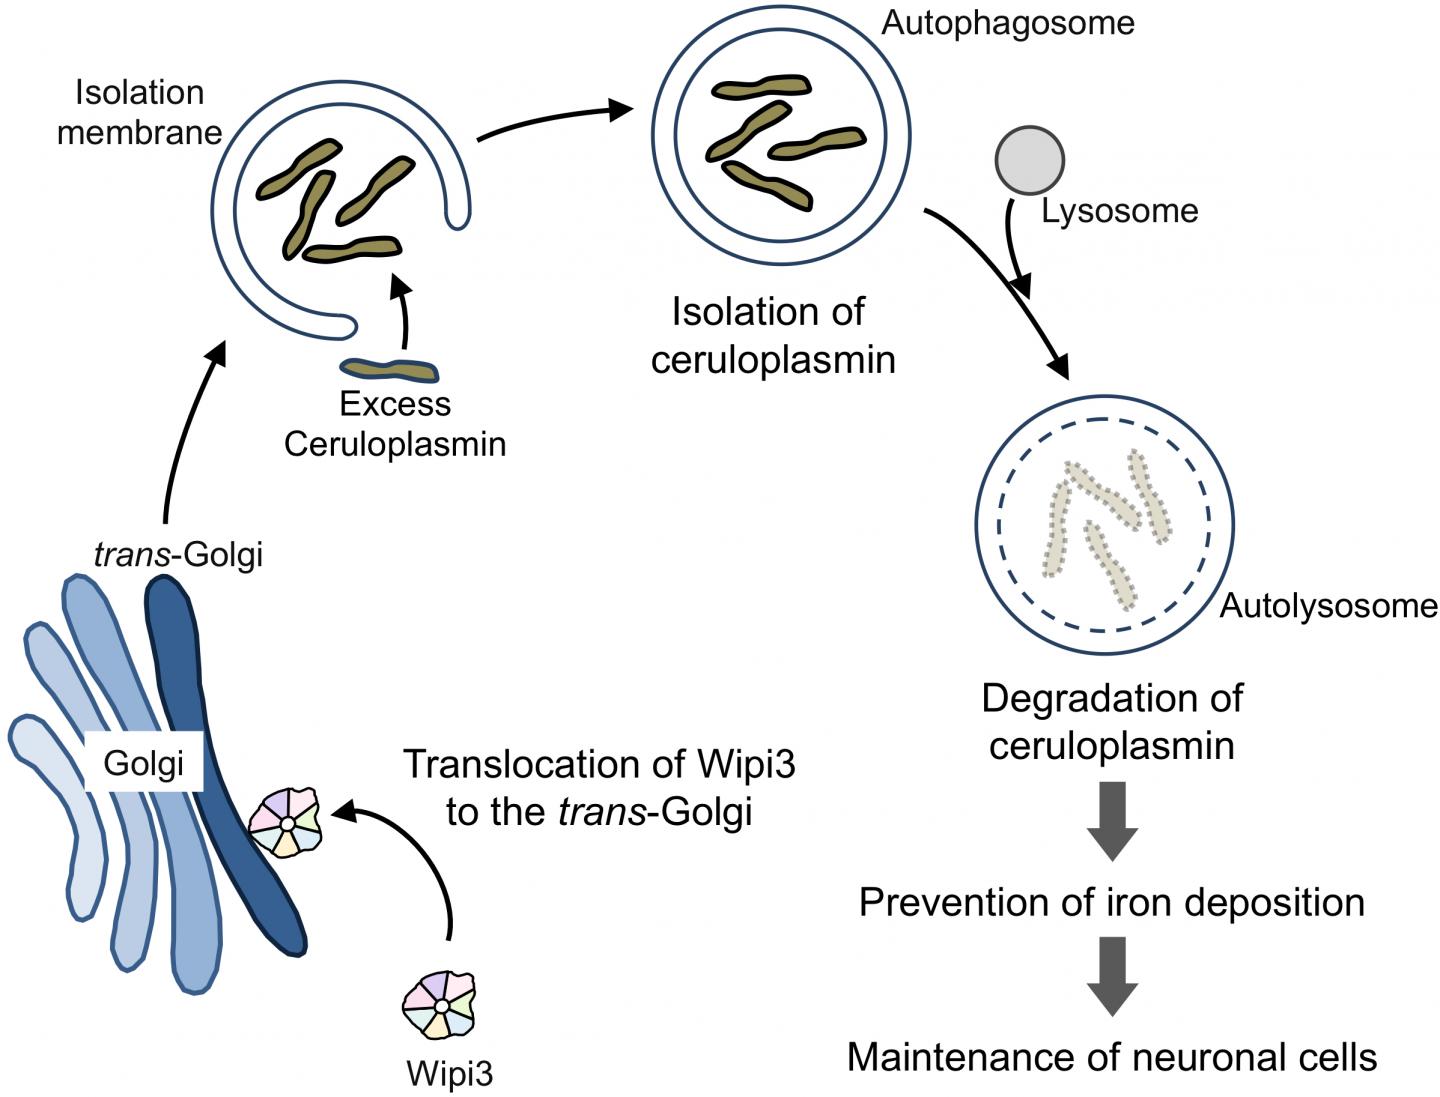 Wipi3 is required for the maintenance of brain cells via alternative autophagy